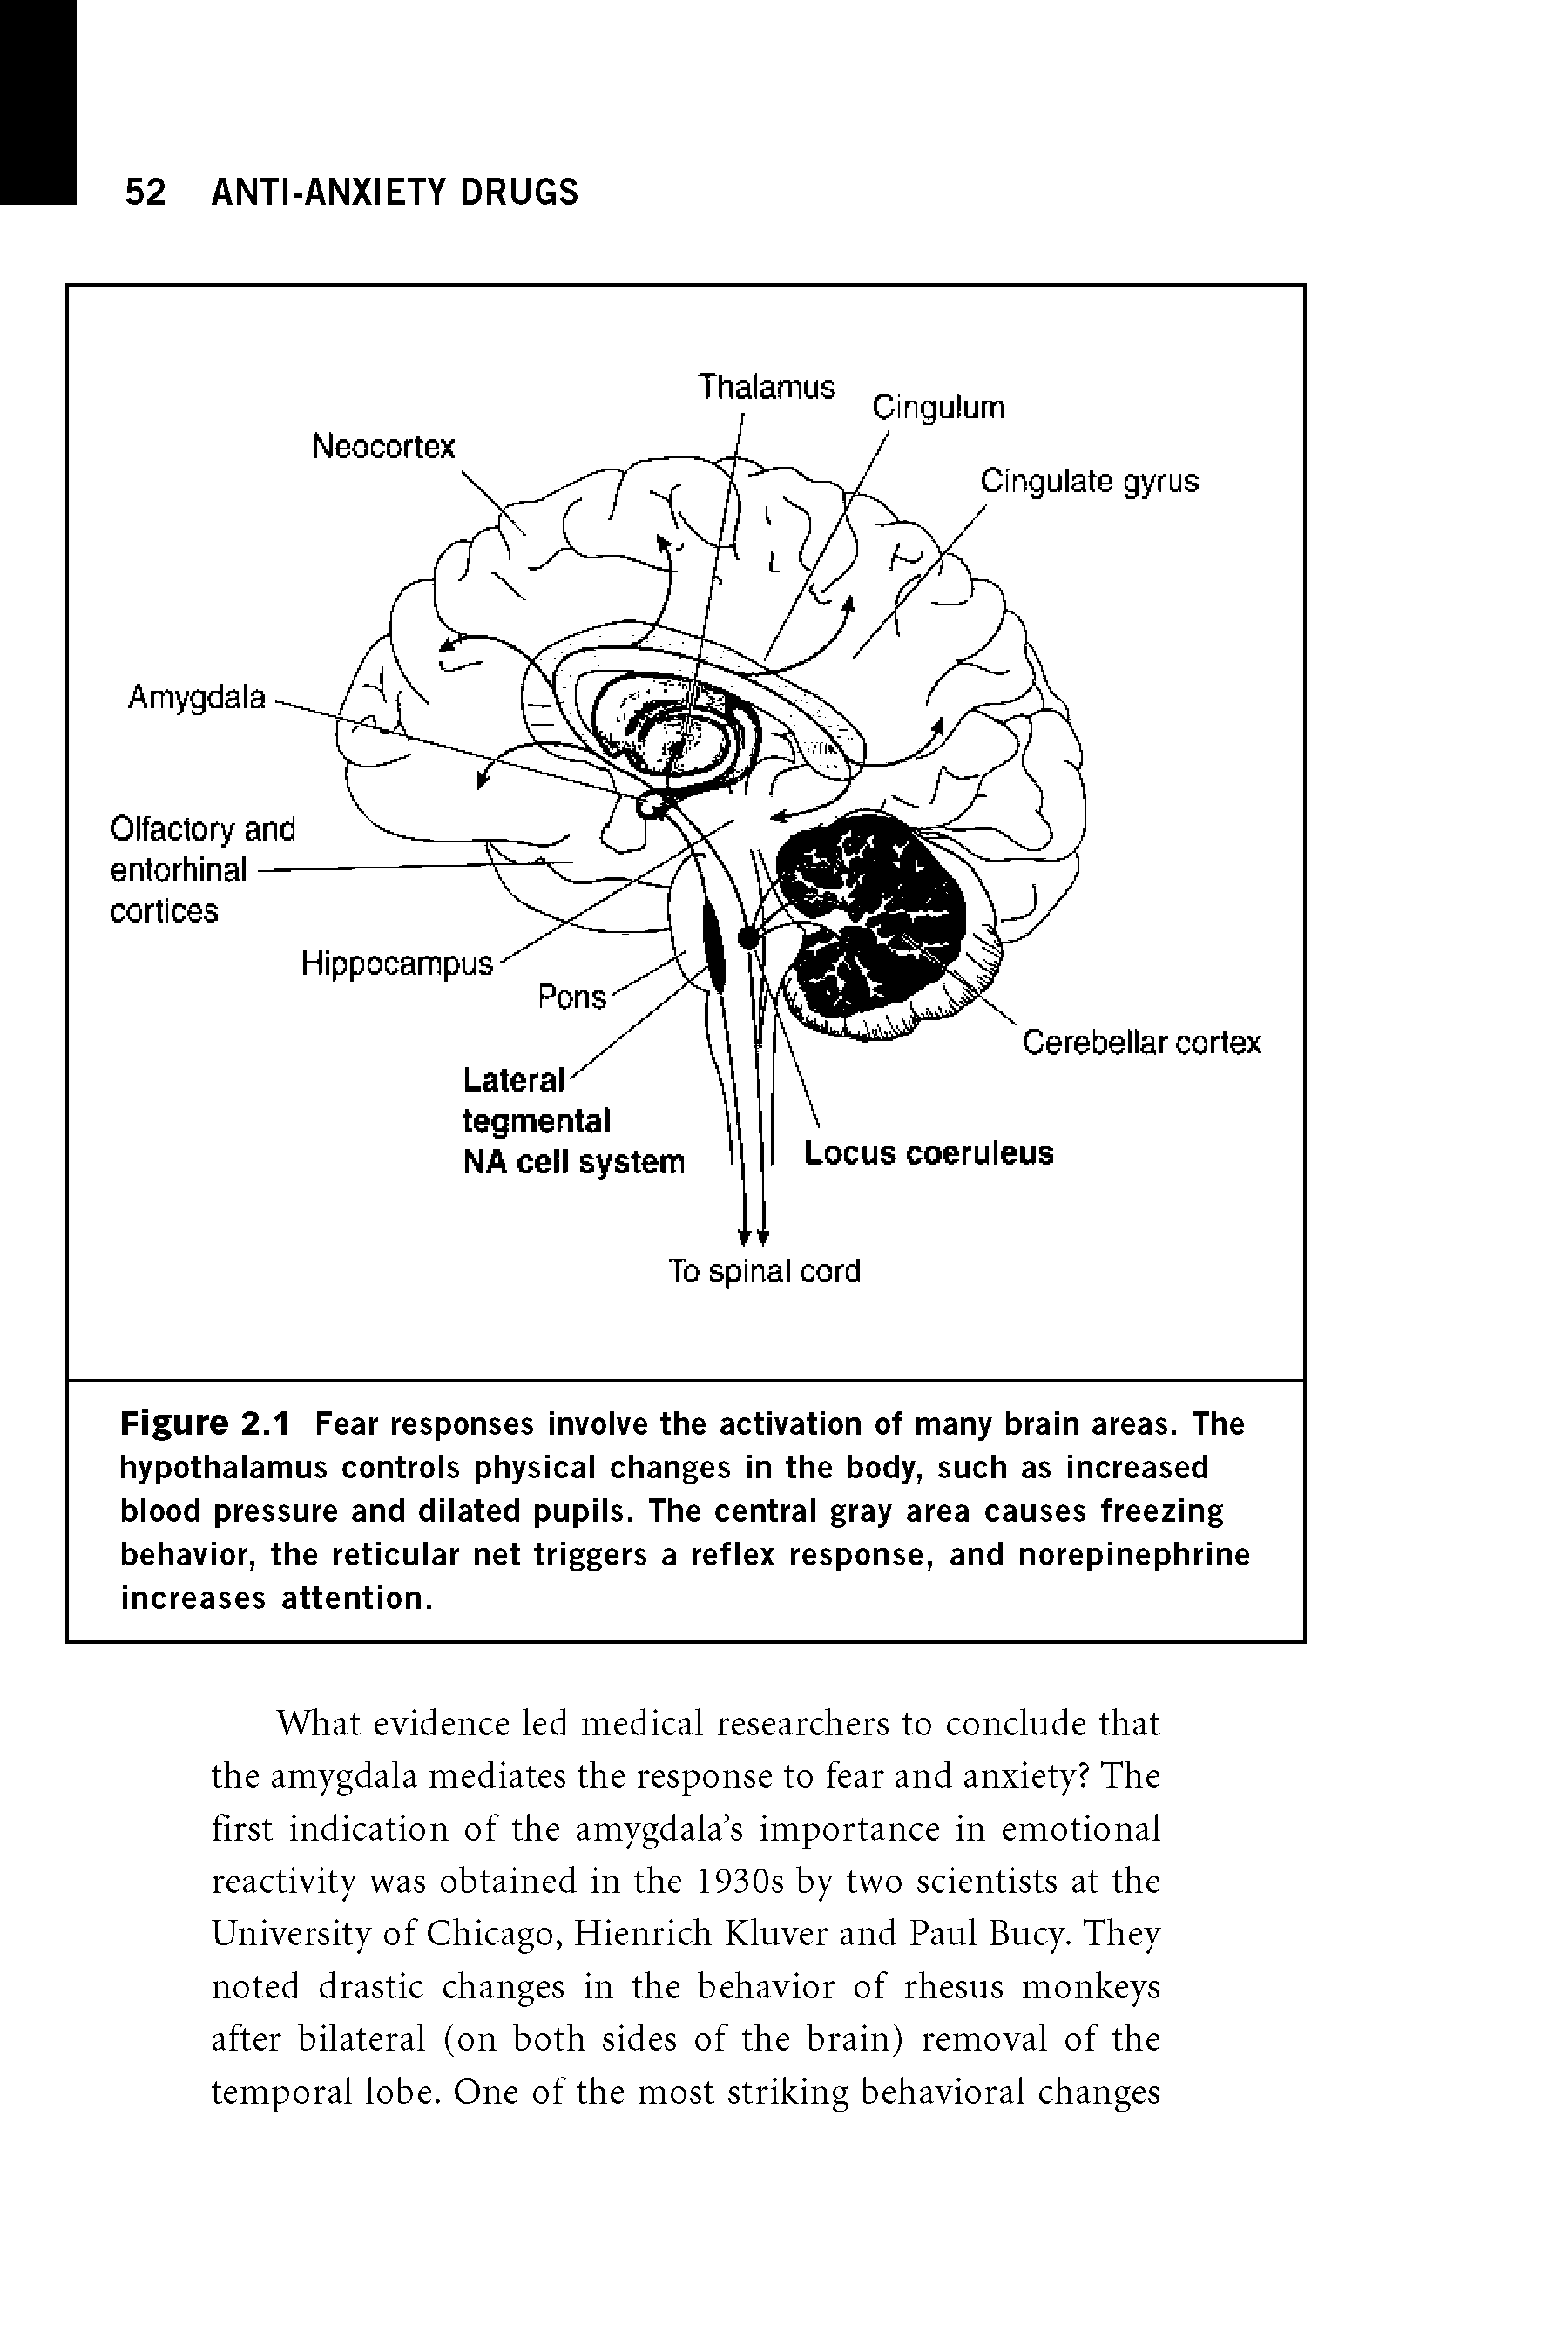 Figure 2.1 Fear responses involve the activation of many brain areas. The hypothalamus controls physical changes in the body, such as increased blood pressure and dilated pupils. The central gray area causes freezing behavior, the reticular net triggers a reflex response, and norepinephrine increases attention.